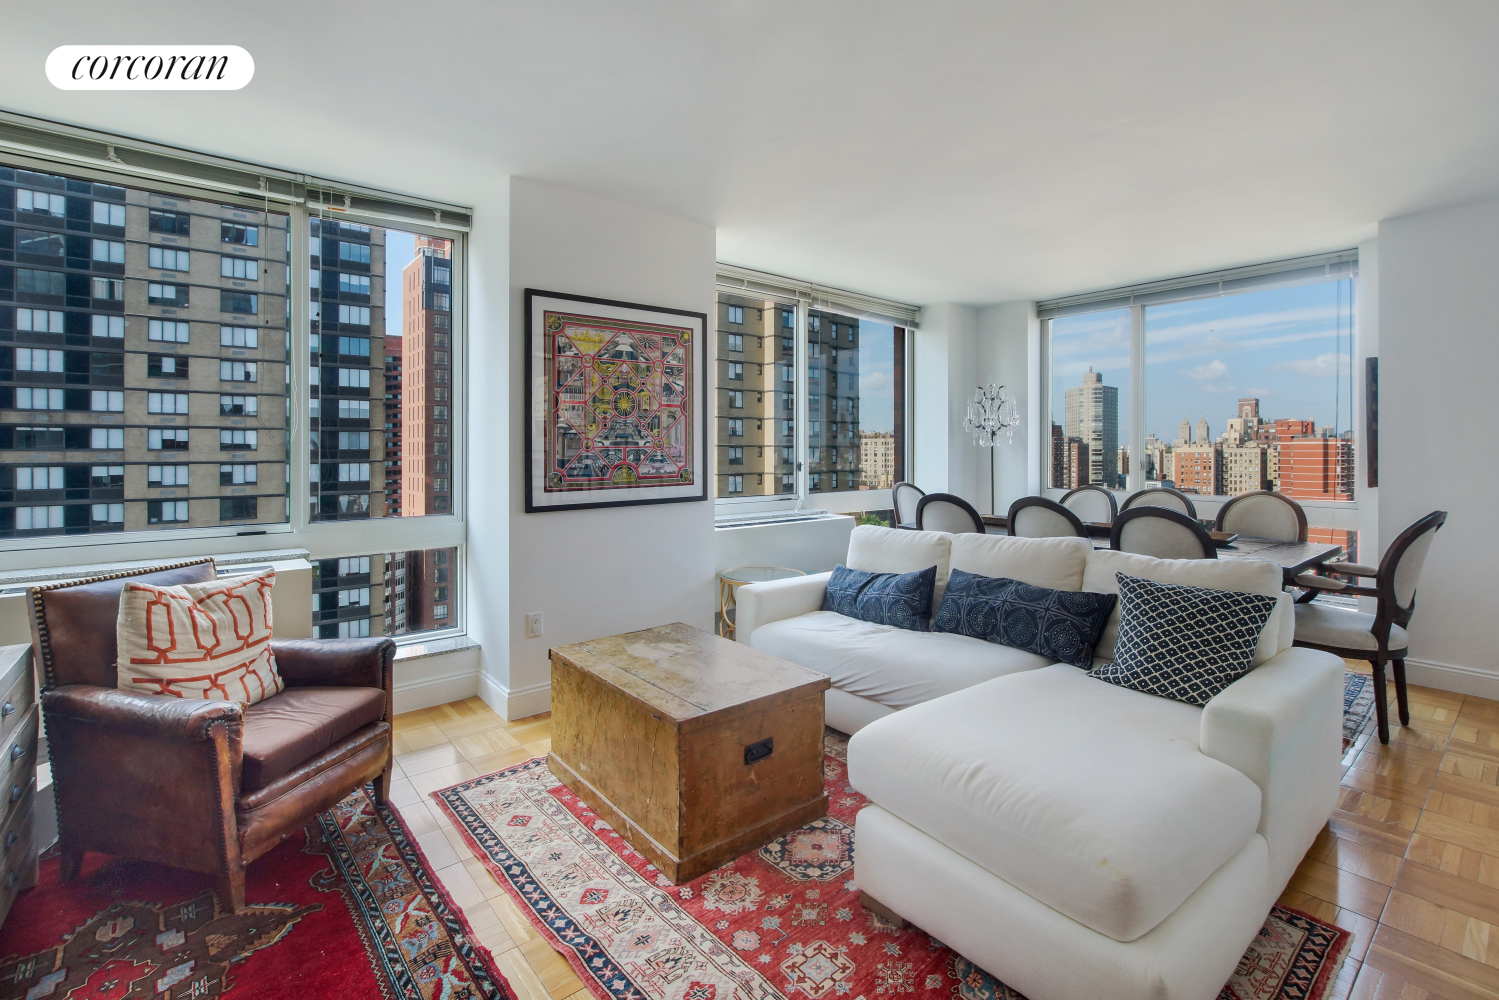 217 East 96th Street 25H, Yorkville, Upper East Side, NYC - 2 Bedrooms  
2 Bathrooms  
5 Rooms - 